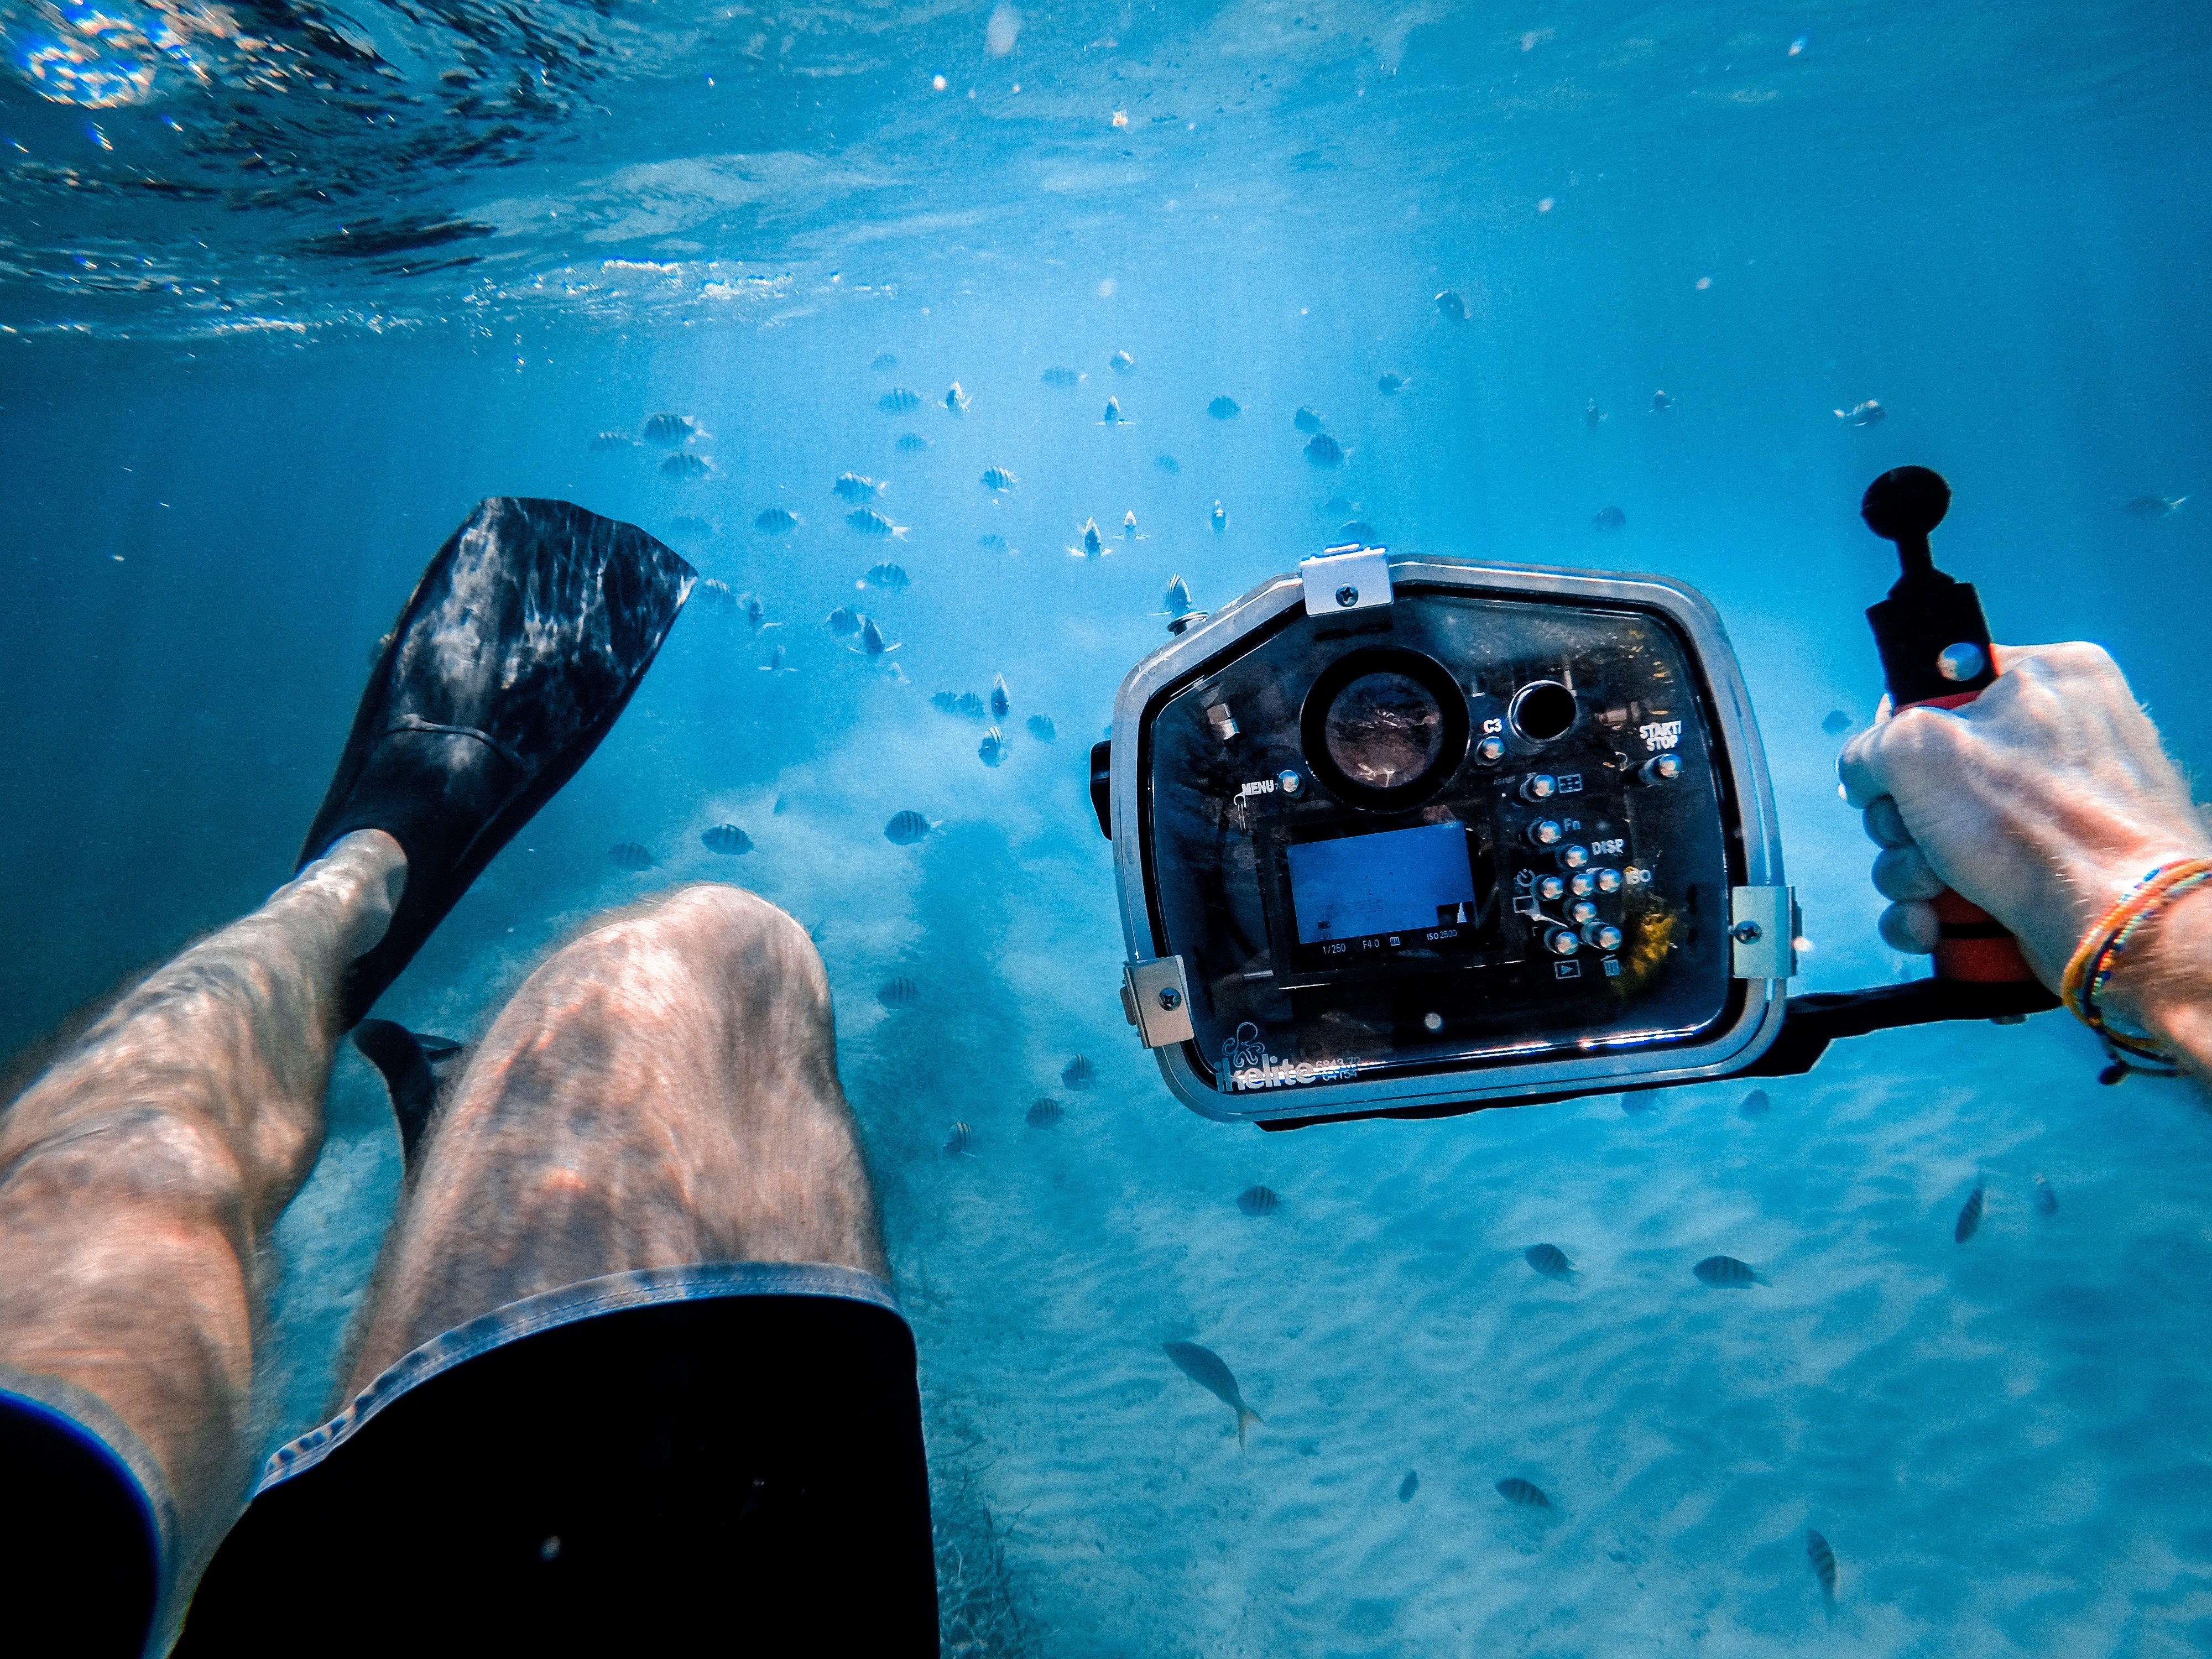 Campark X30 Action Camera: Best Underwater Camera for Diving